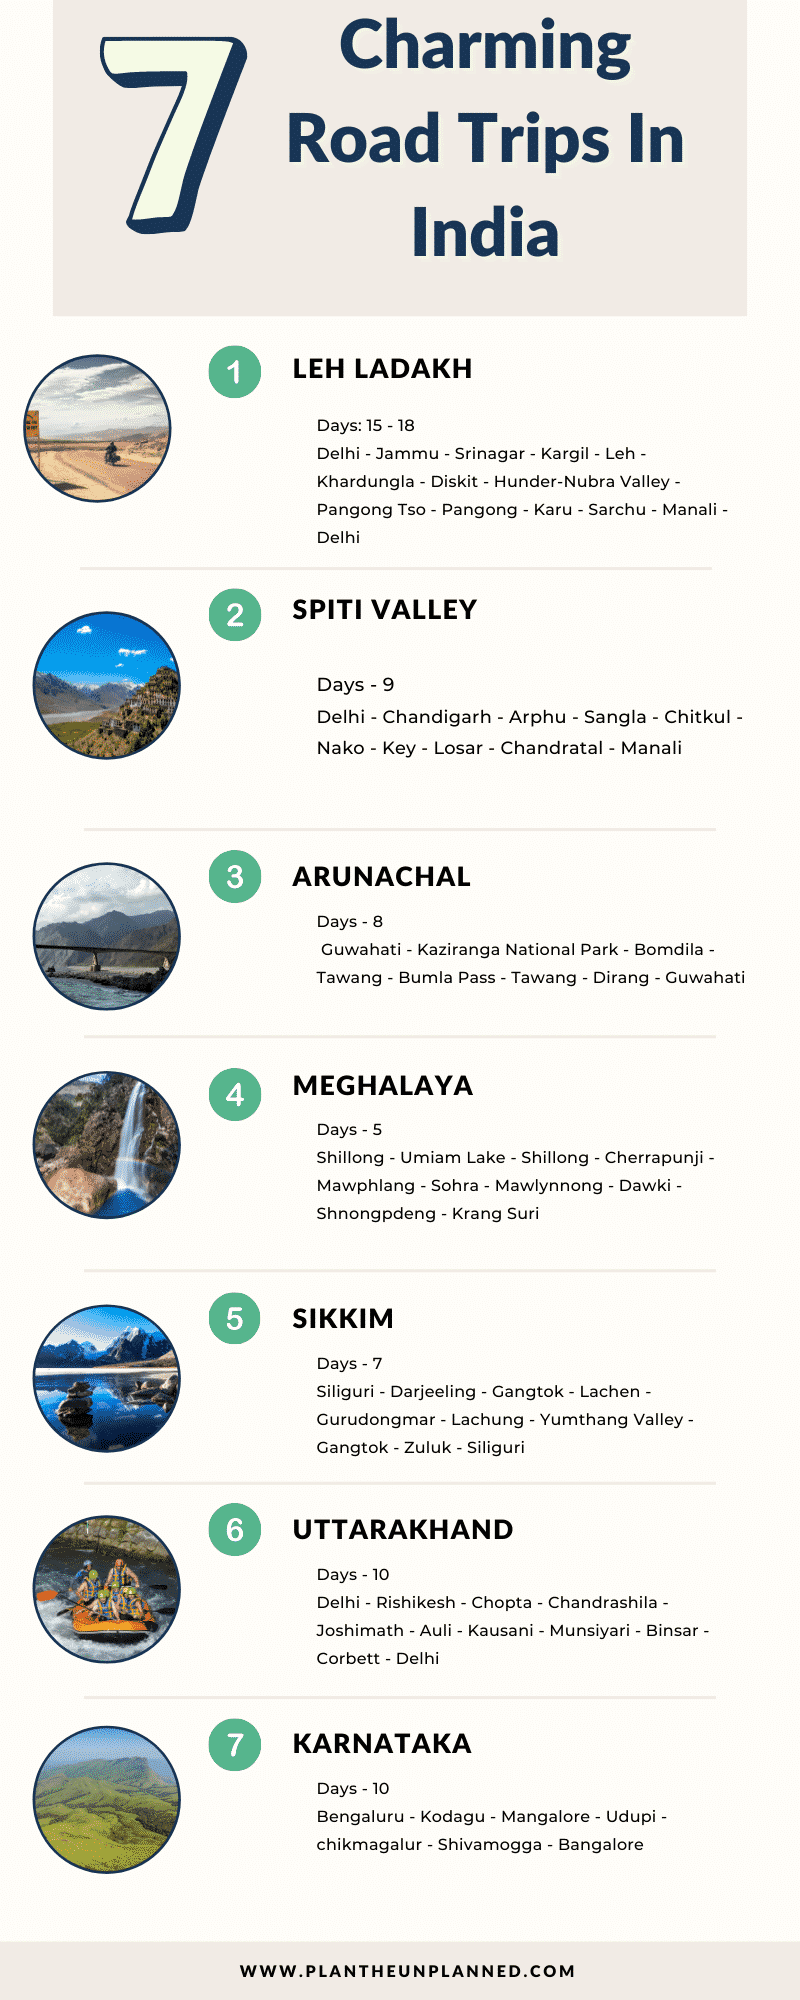 7 Road Trips in India- Summary